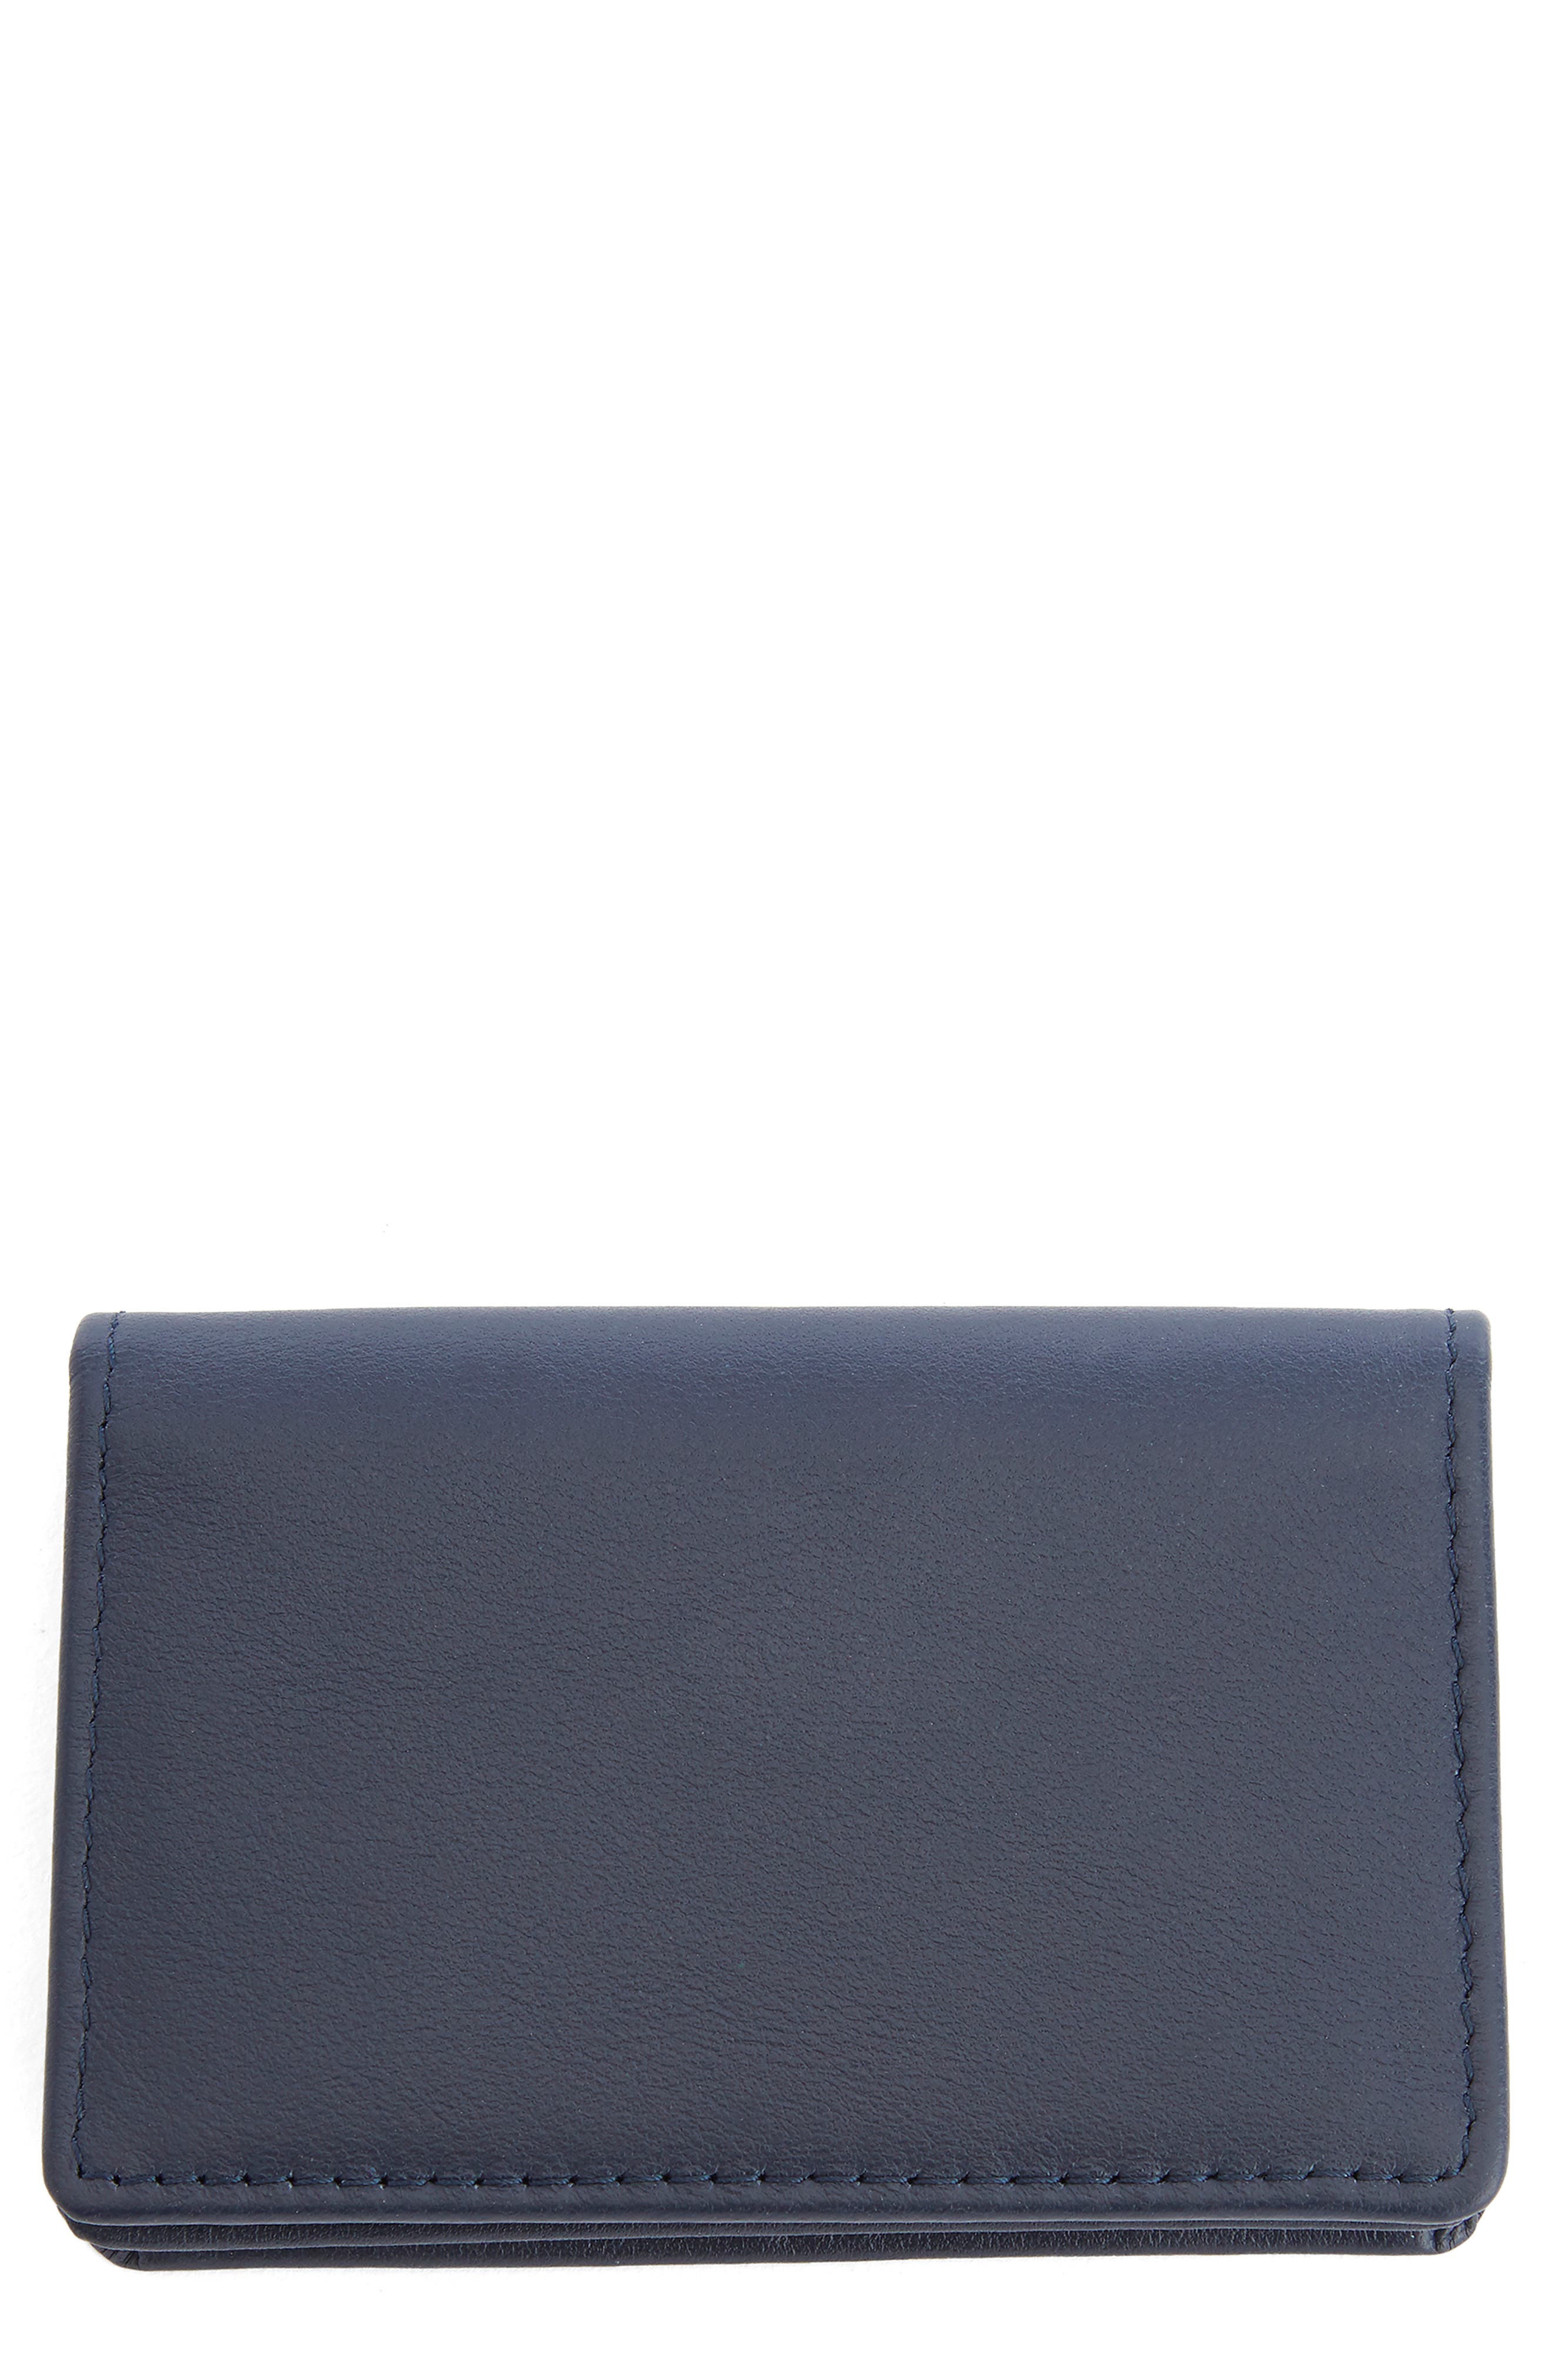 Real Leather Fan Style Credit Card Holder from Prime Hide Black